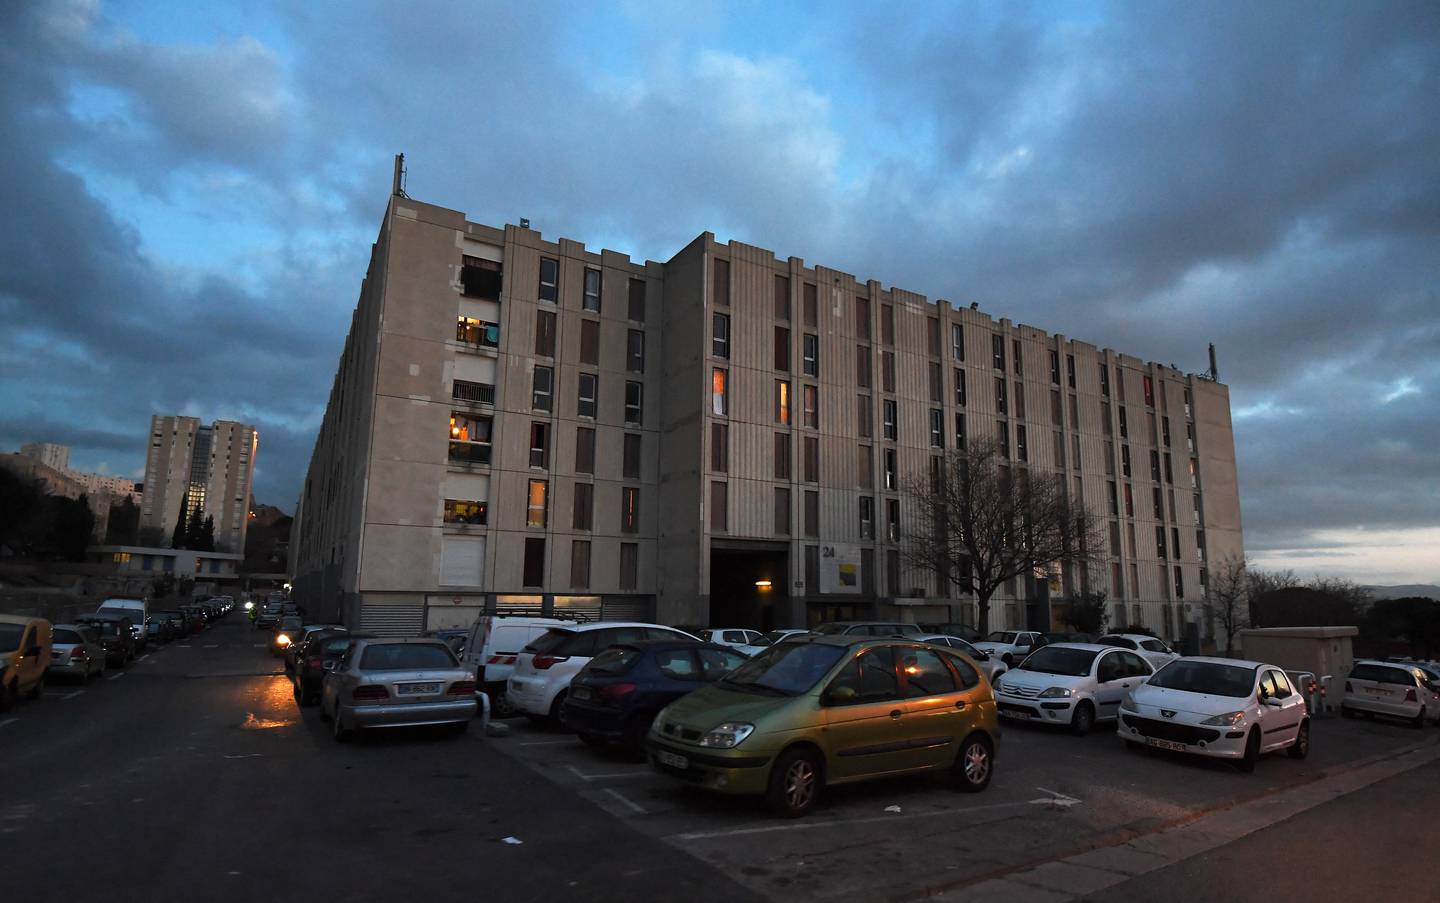 La Castellane housing project in northern Marseille is among the city's more notorious estates. Photo: AFP